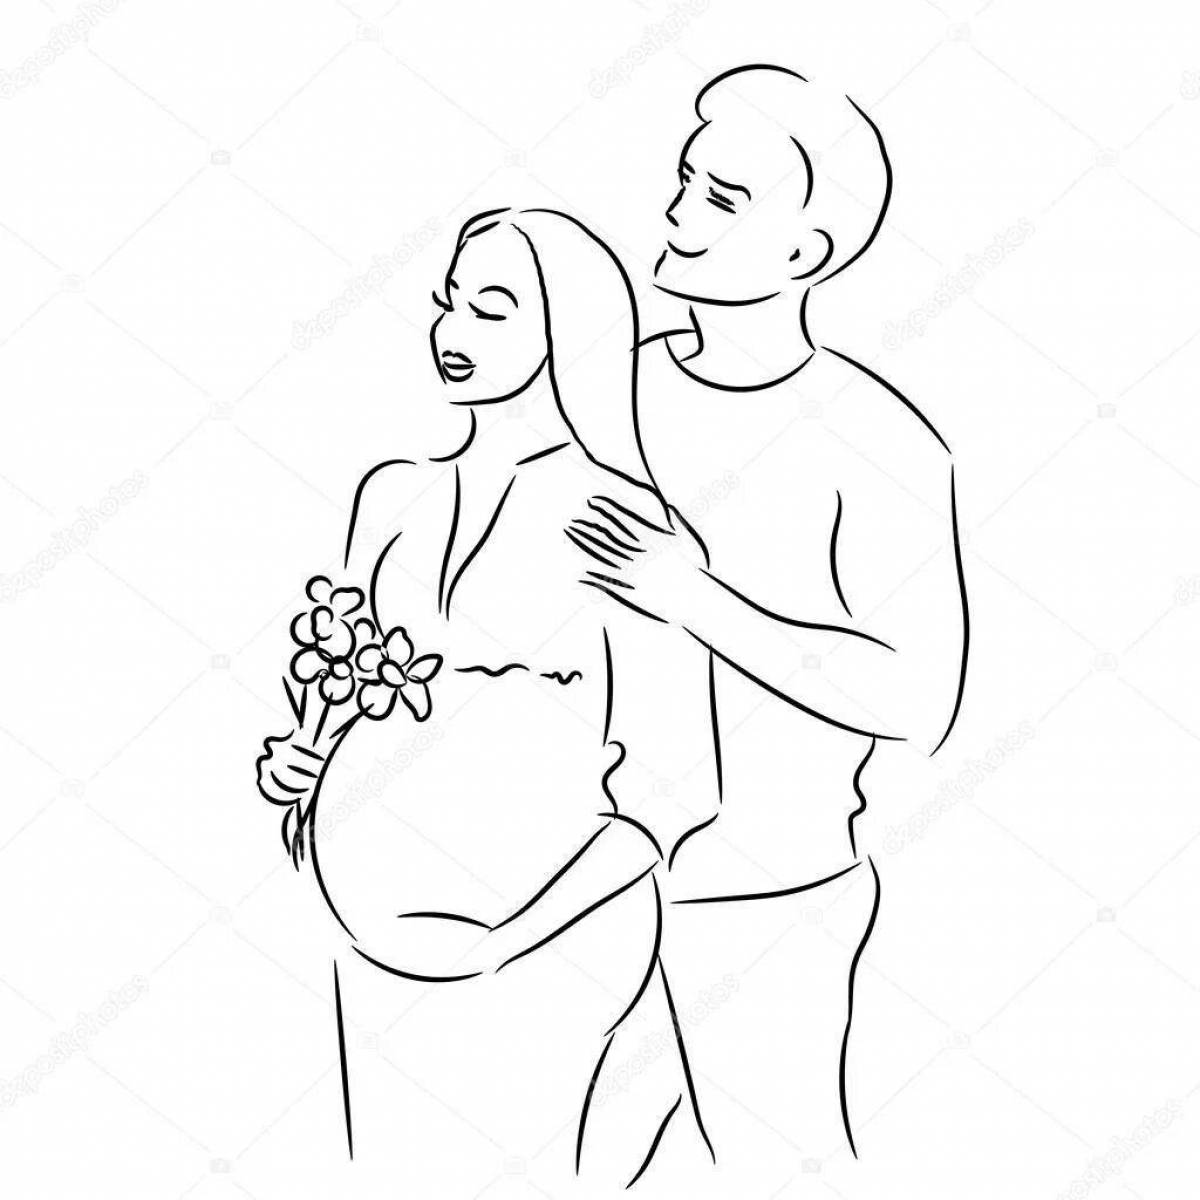 Delightful woman and man coloring book